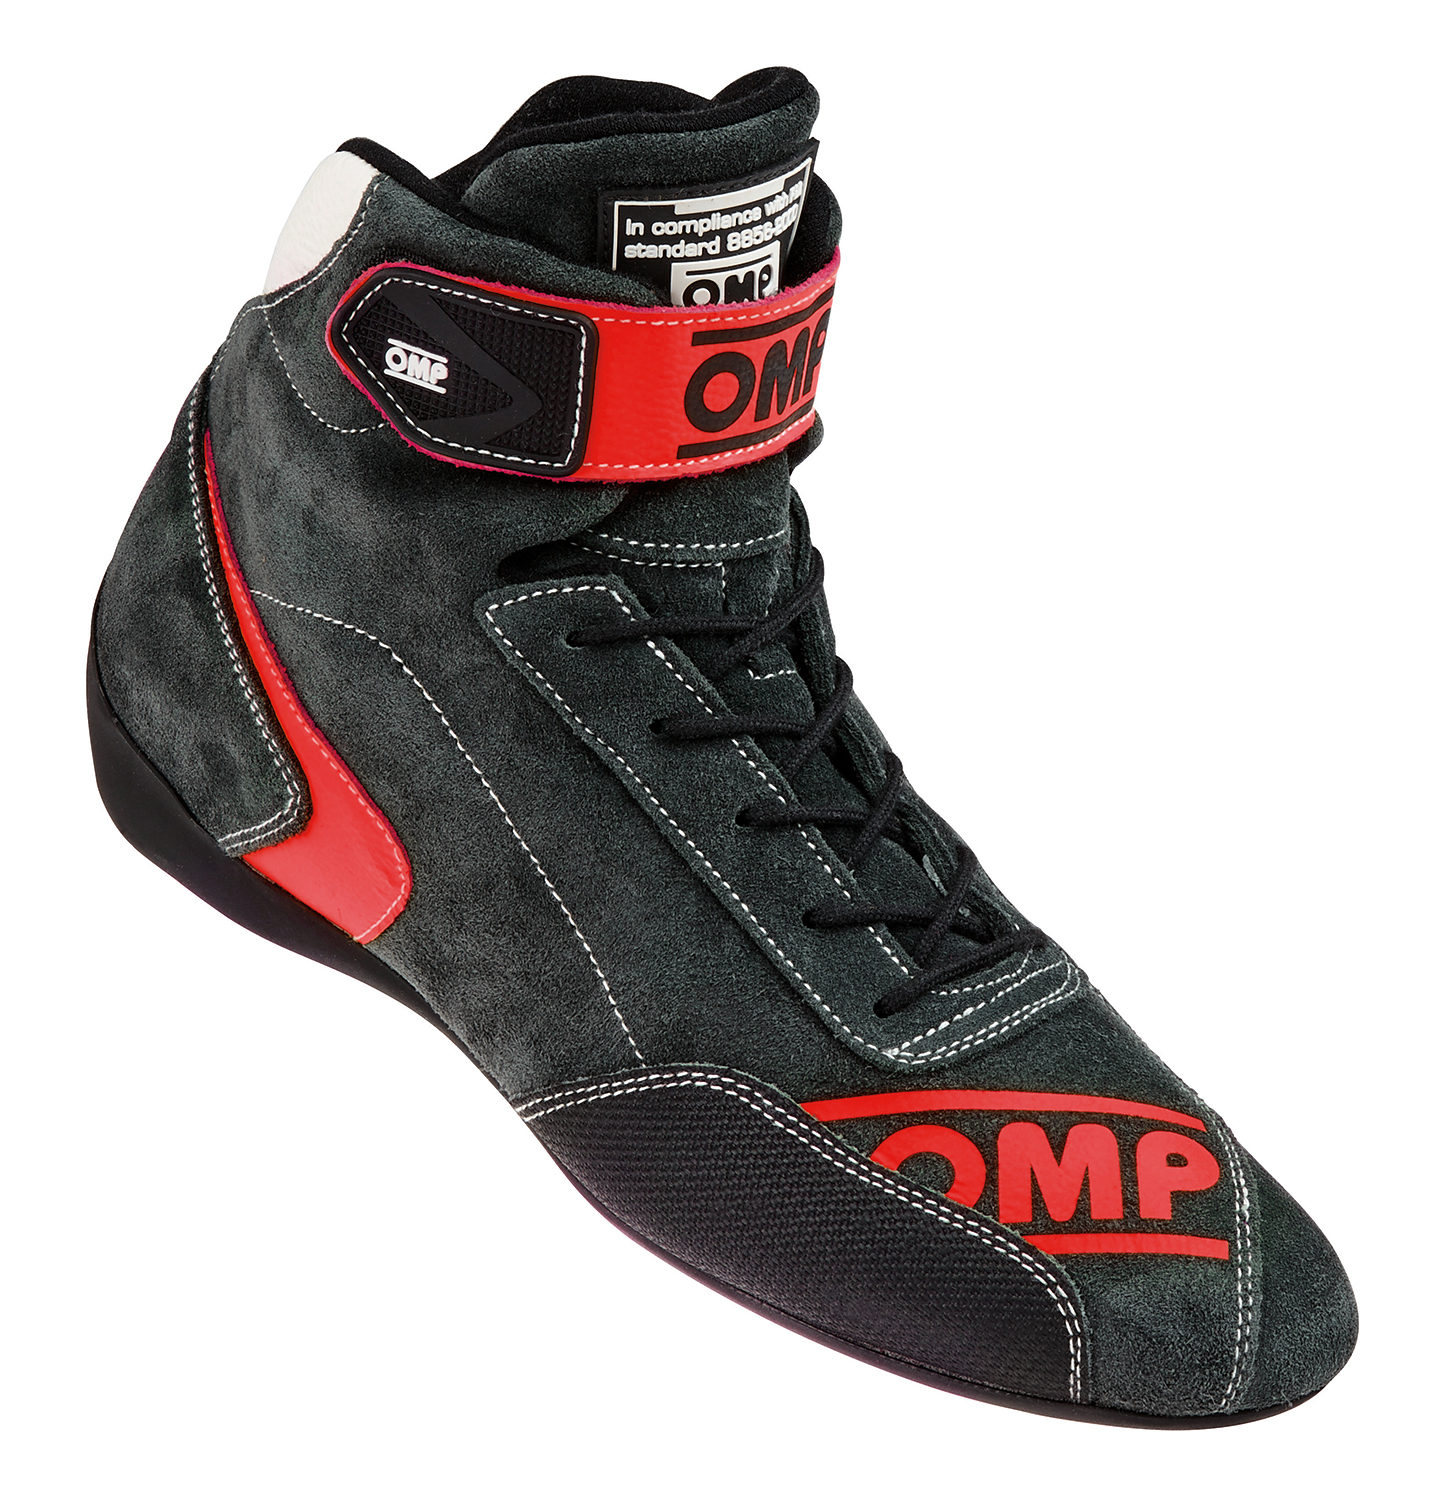 IC/809 OMP FIRST EVO RACING RALLY BOOTS SHOES FIREPROOF FIA 8856-2000